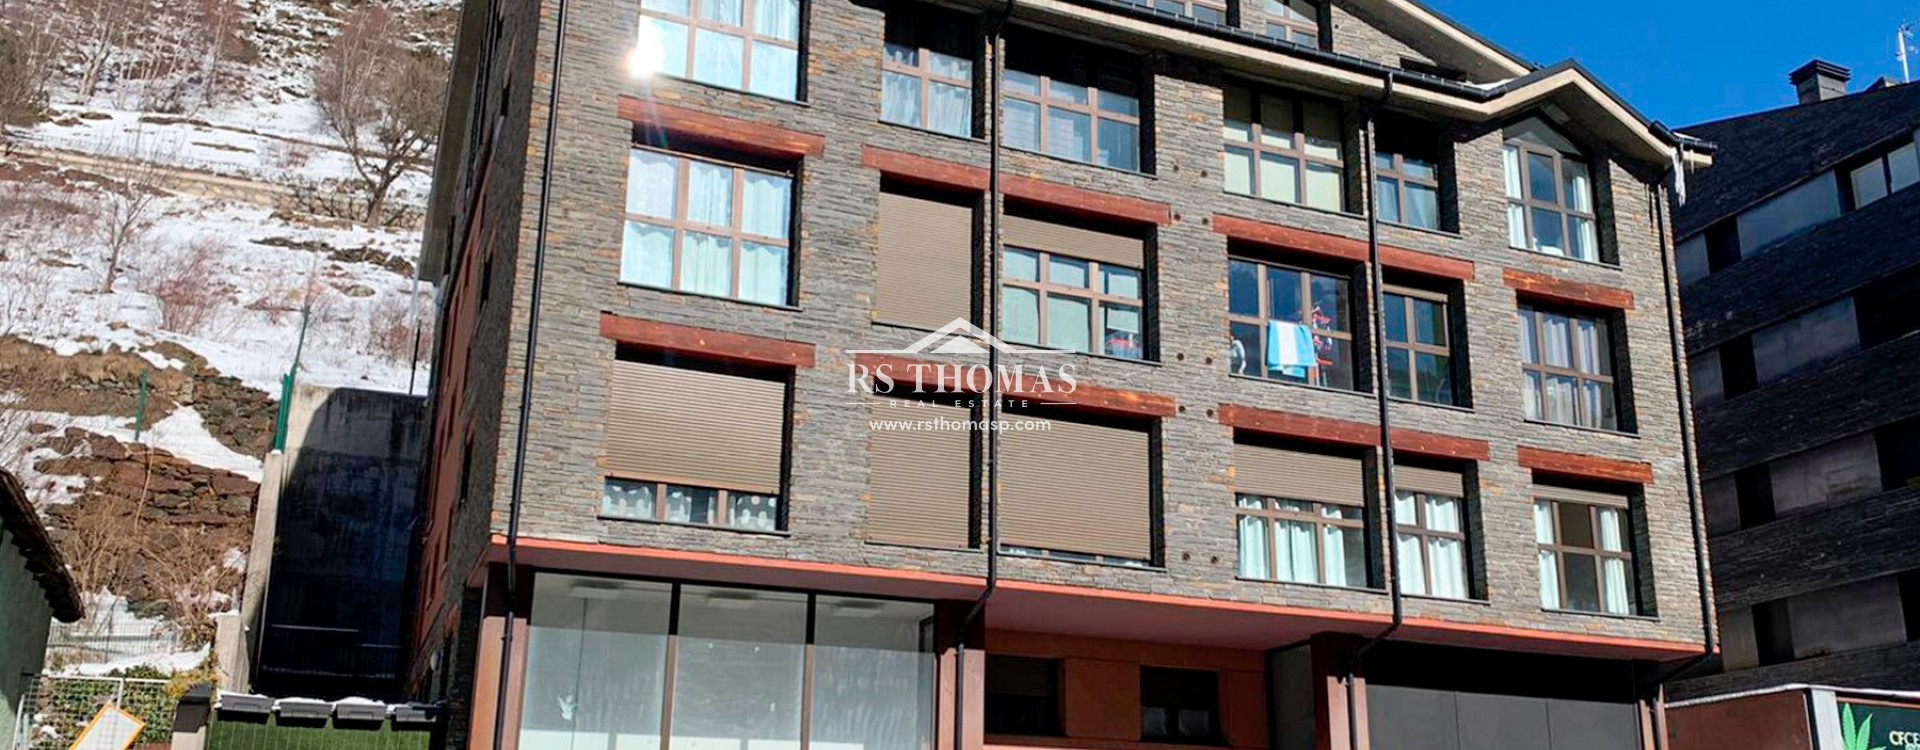 Apartment for rent in El Tarter, Canillo